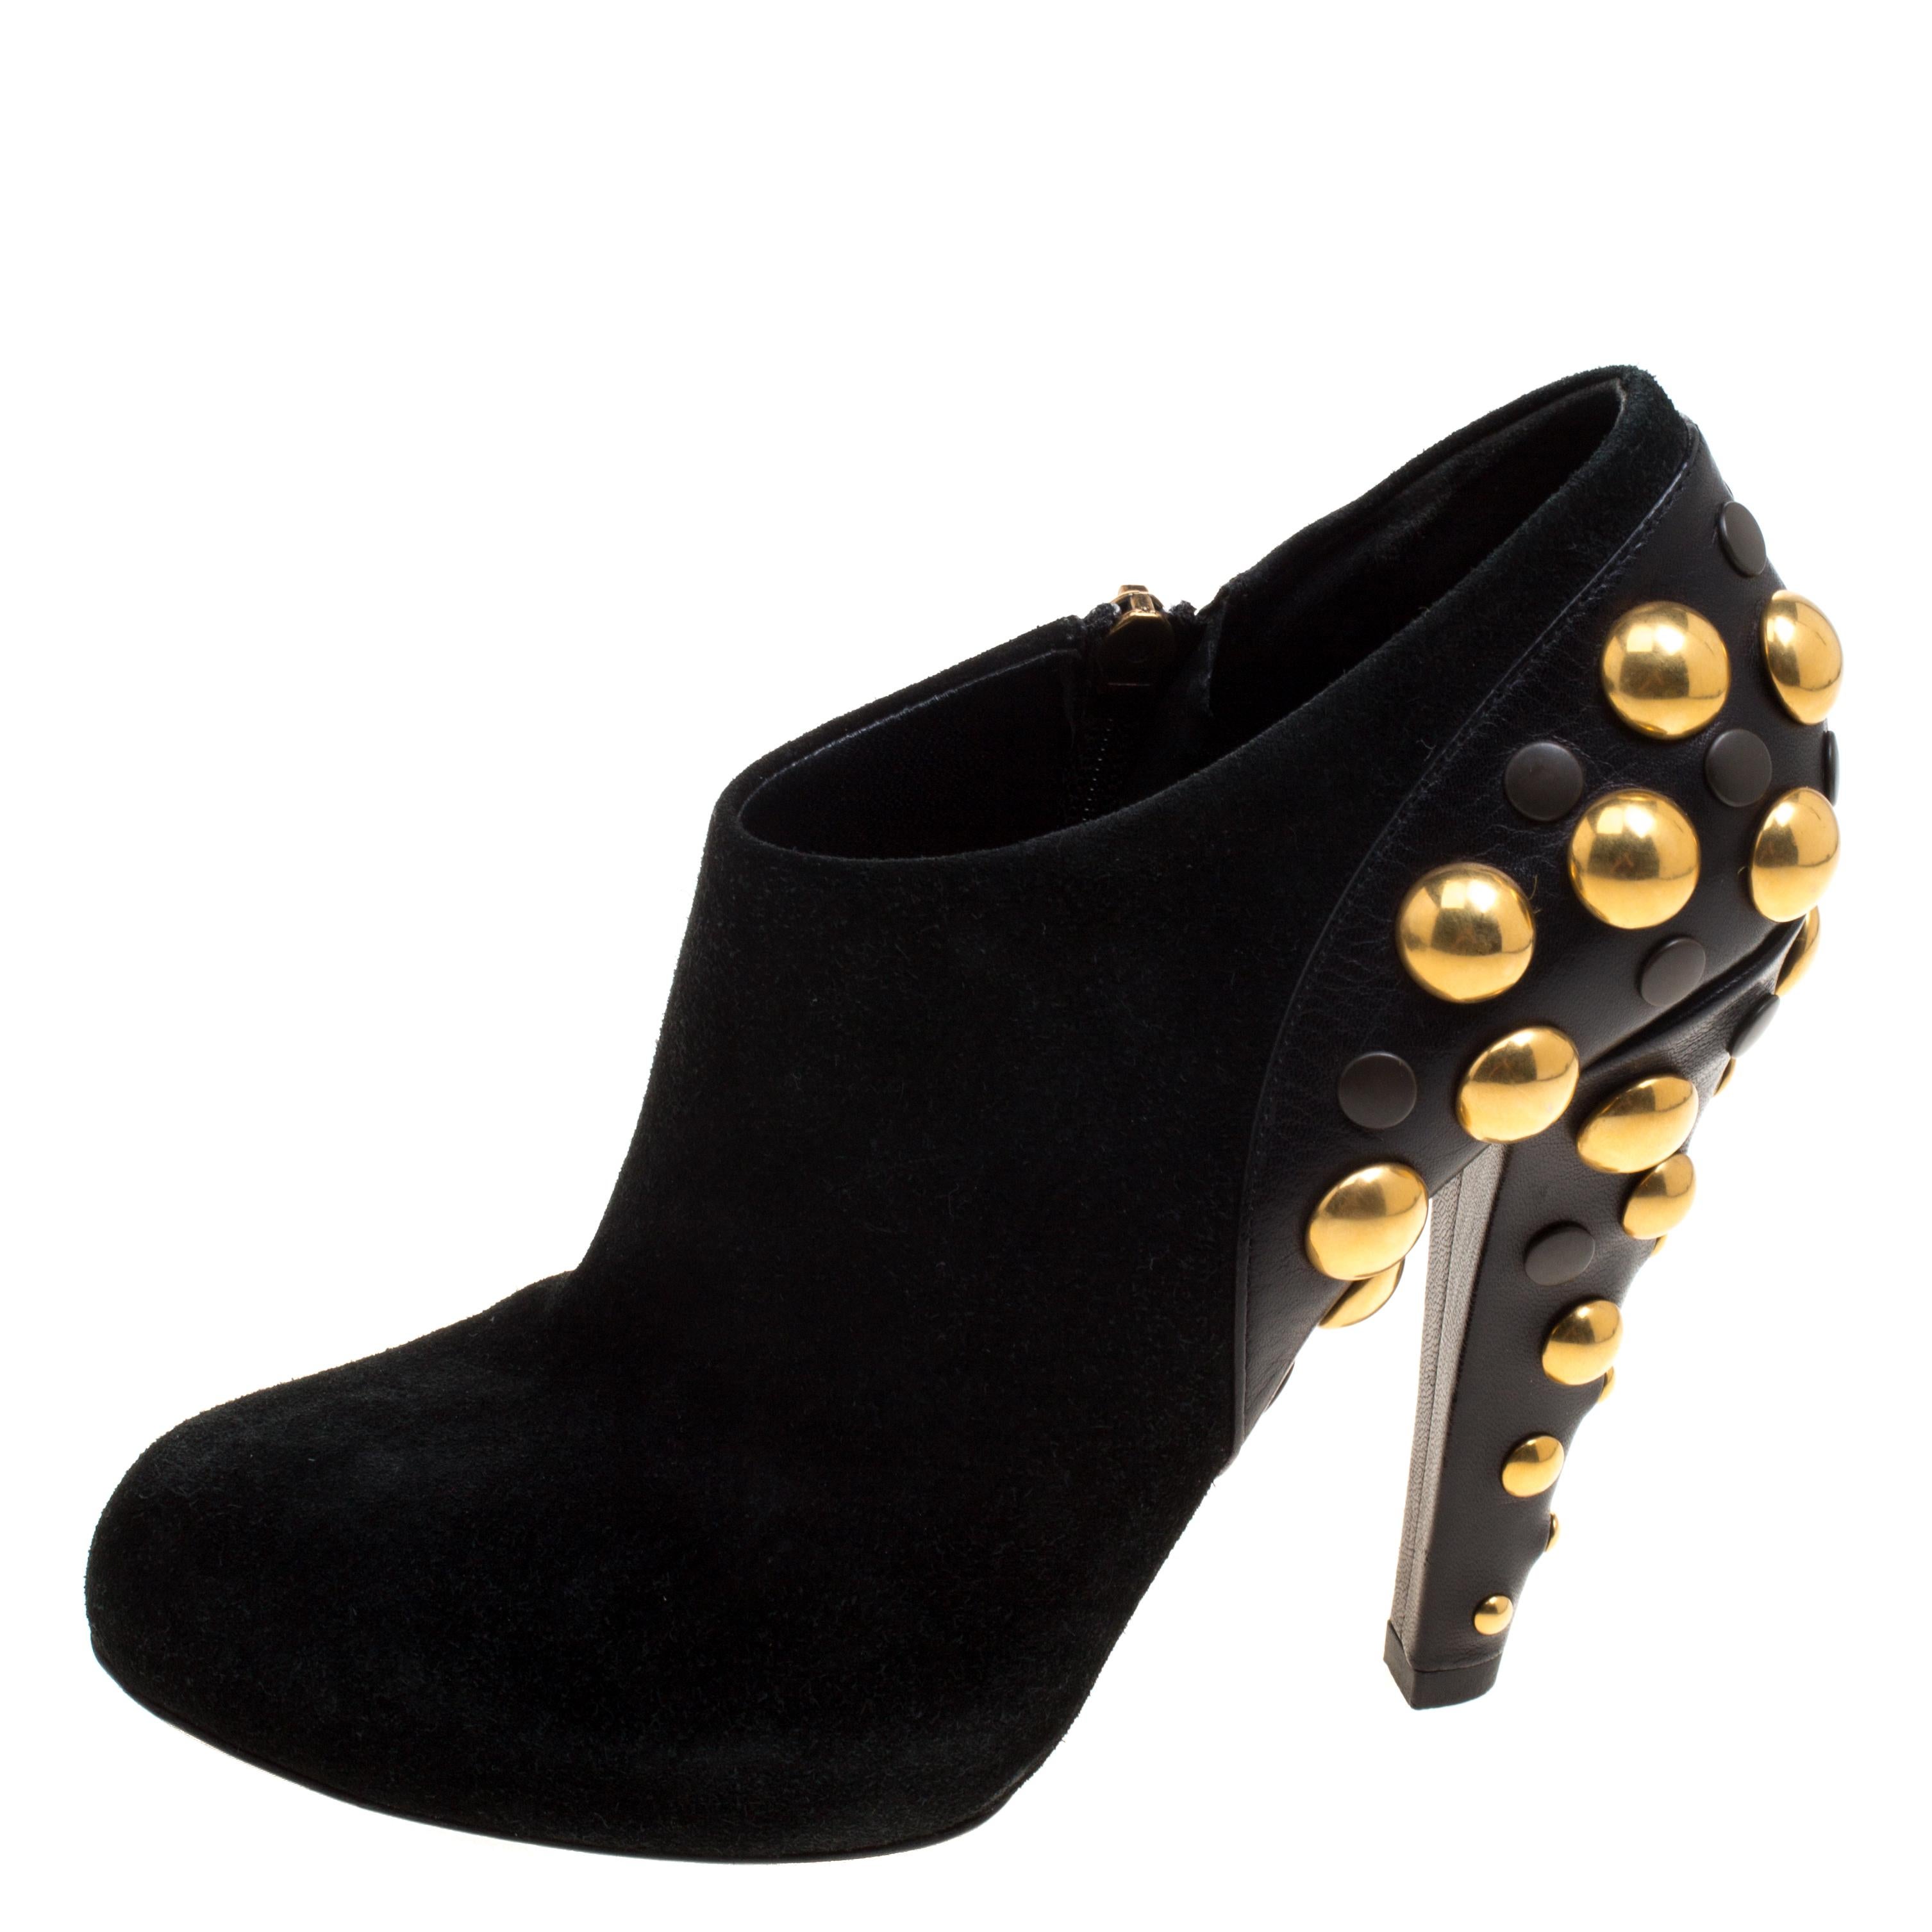 Boots that stand out and speak for themselves, these Gucci ankle boots will never fail to make a stylish statement. Constructed in black suede, this Vintage Babouska piece features a black and gold studded back all the way down the heels that will